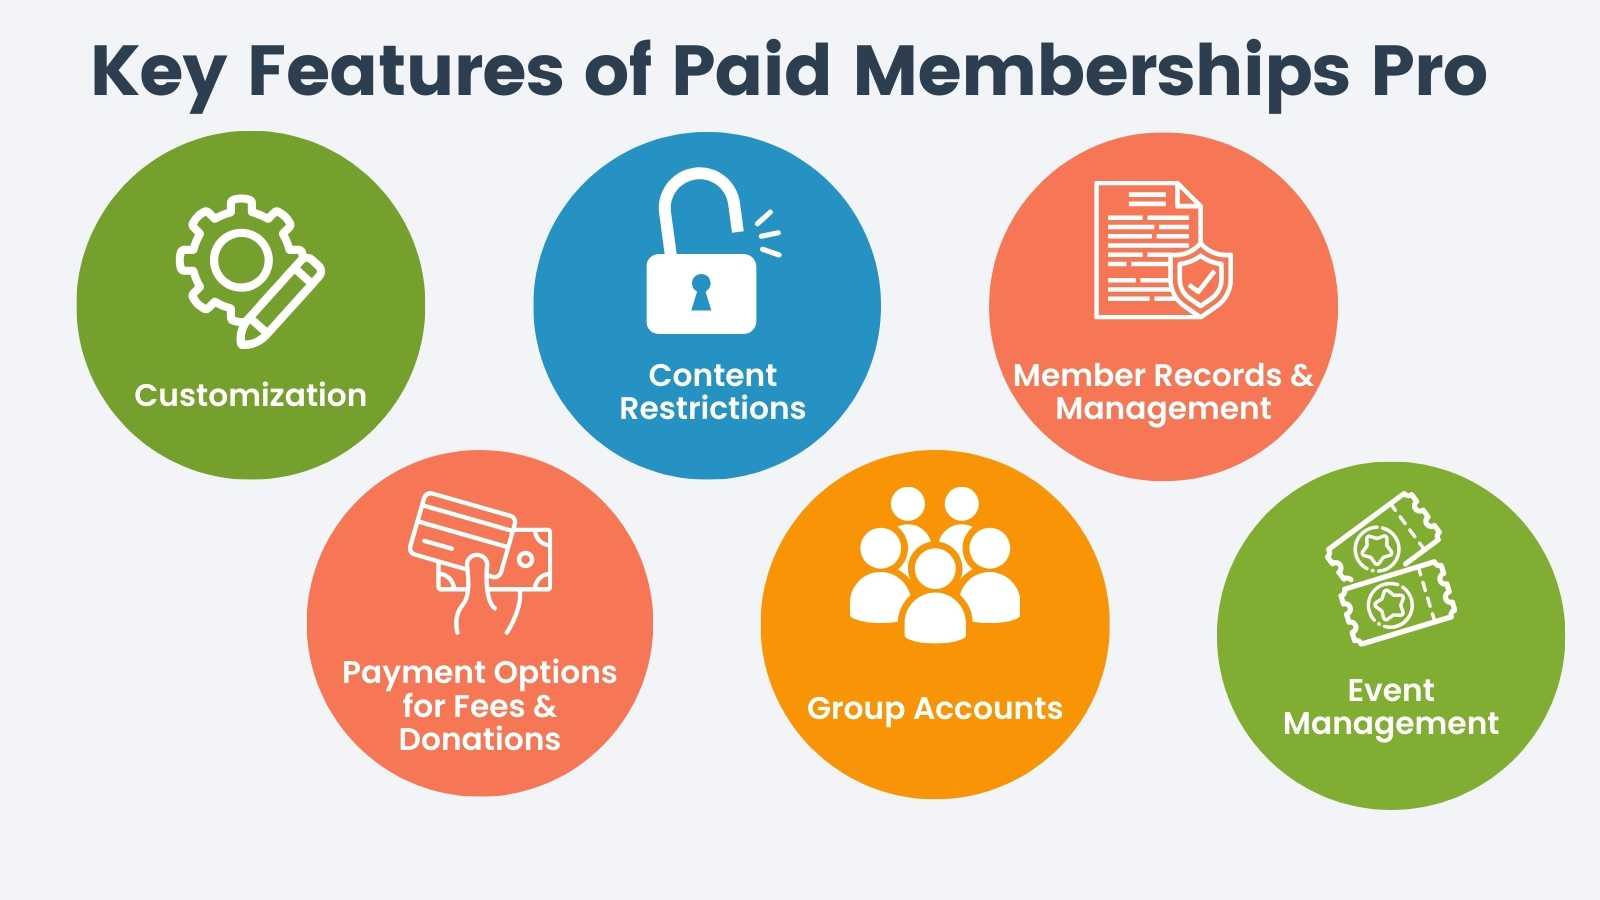 Infographic of Key Features of PMPro: Customization, Content Restrictions, Member Records and Management, Payment Options for Fees and Donations, Group Accounts and Event Management